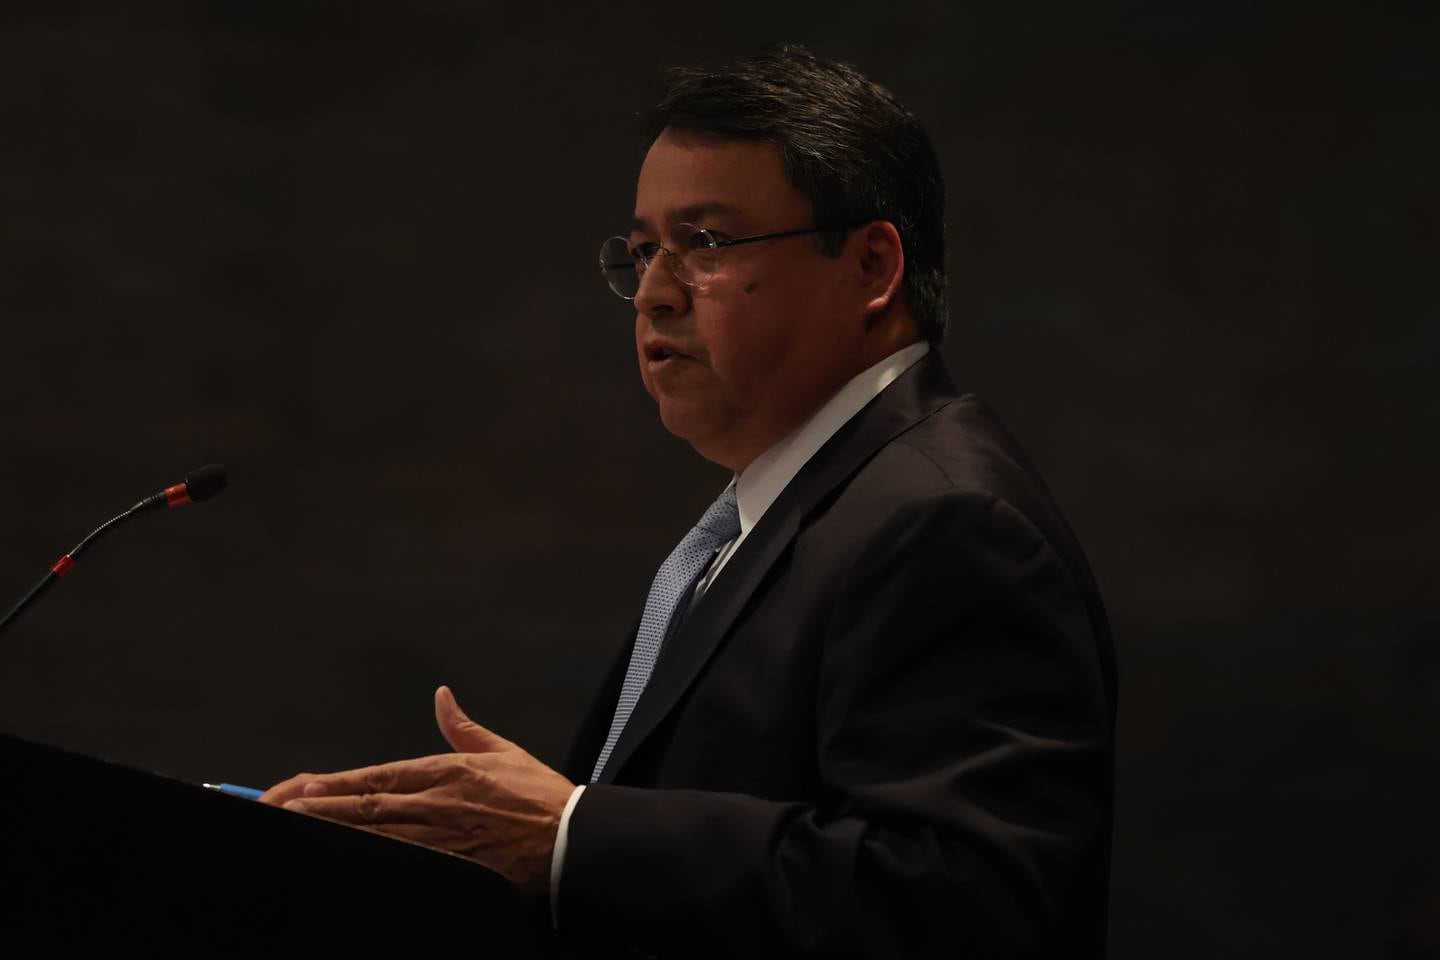 Ricardo Meza, attorney for council Member Pat Murdon speaks to the council members during the City Council Meeting at City Hall in Joliet on Monday, March 13th, 2023.